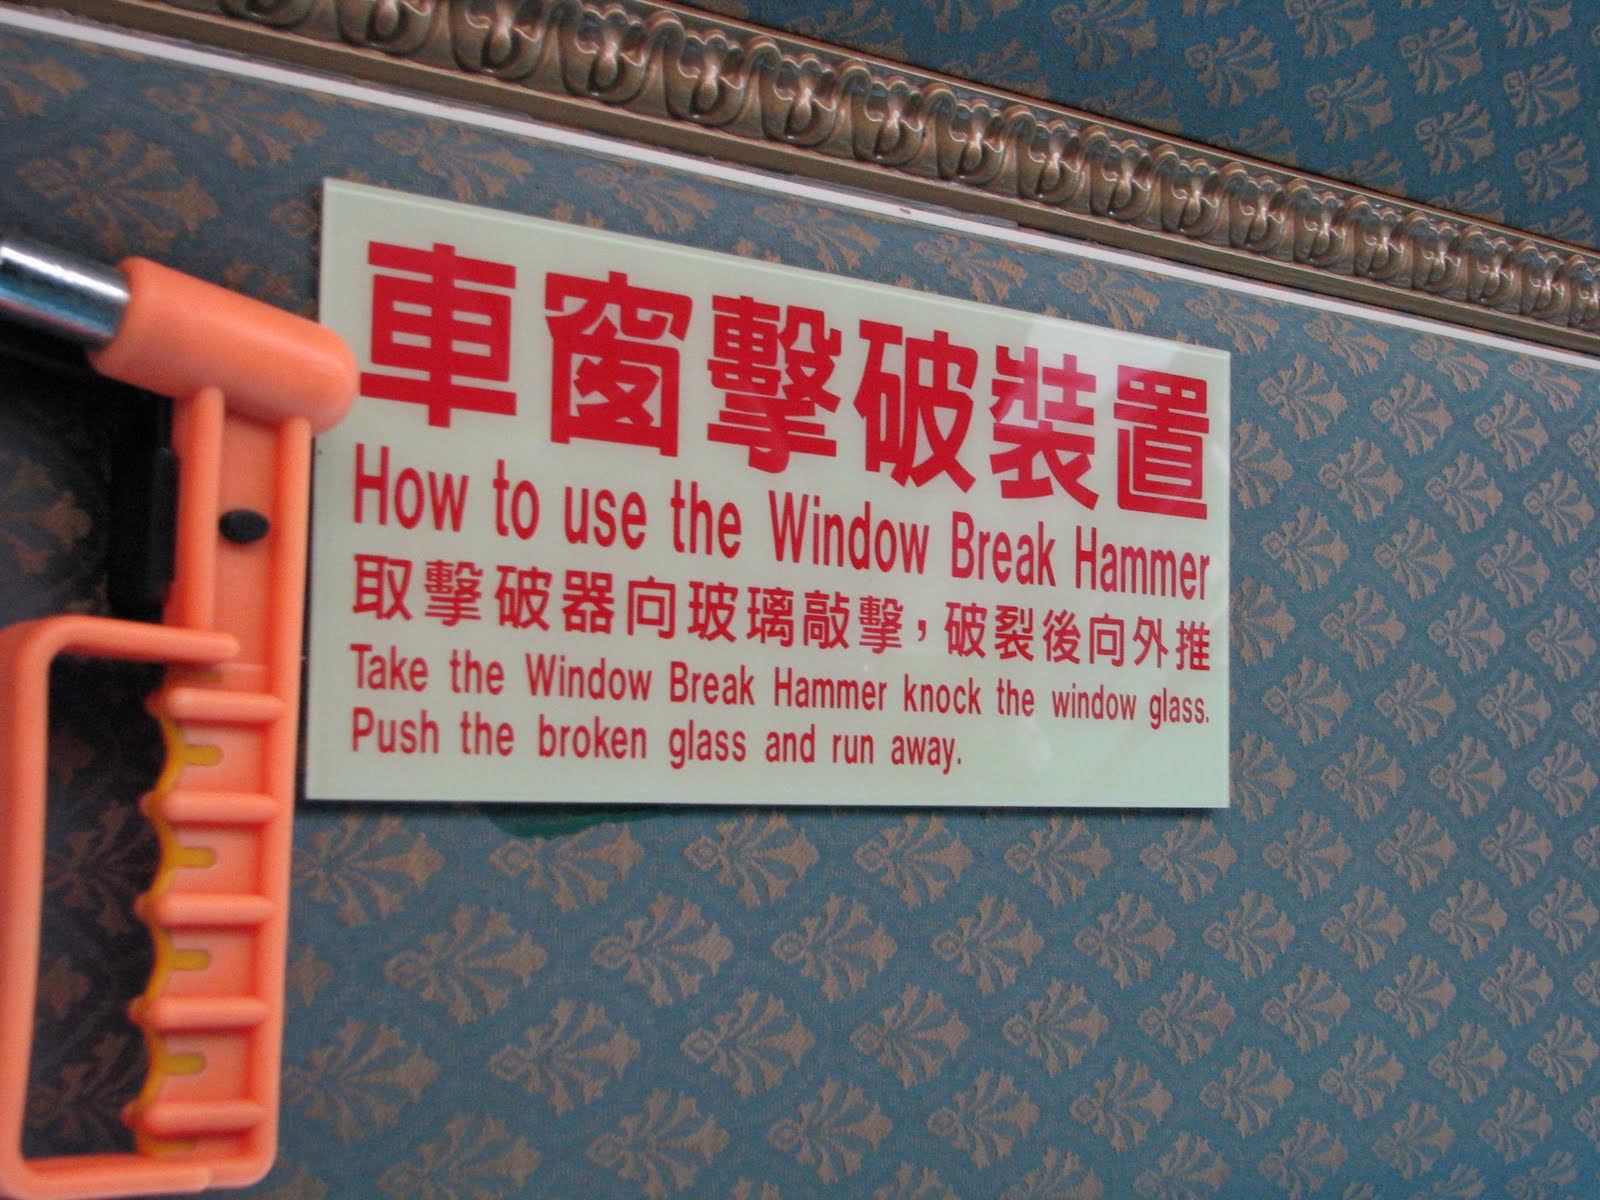 "How to use the Window Break Hammer"...